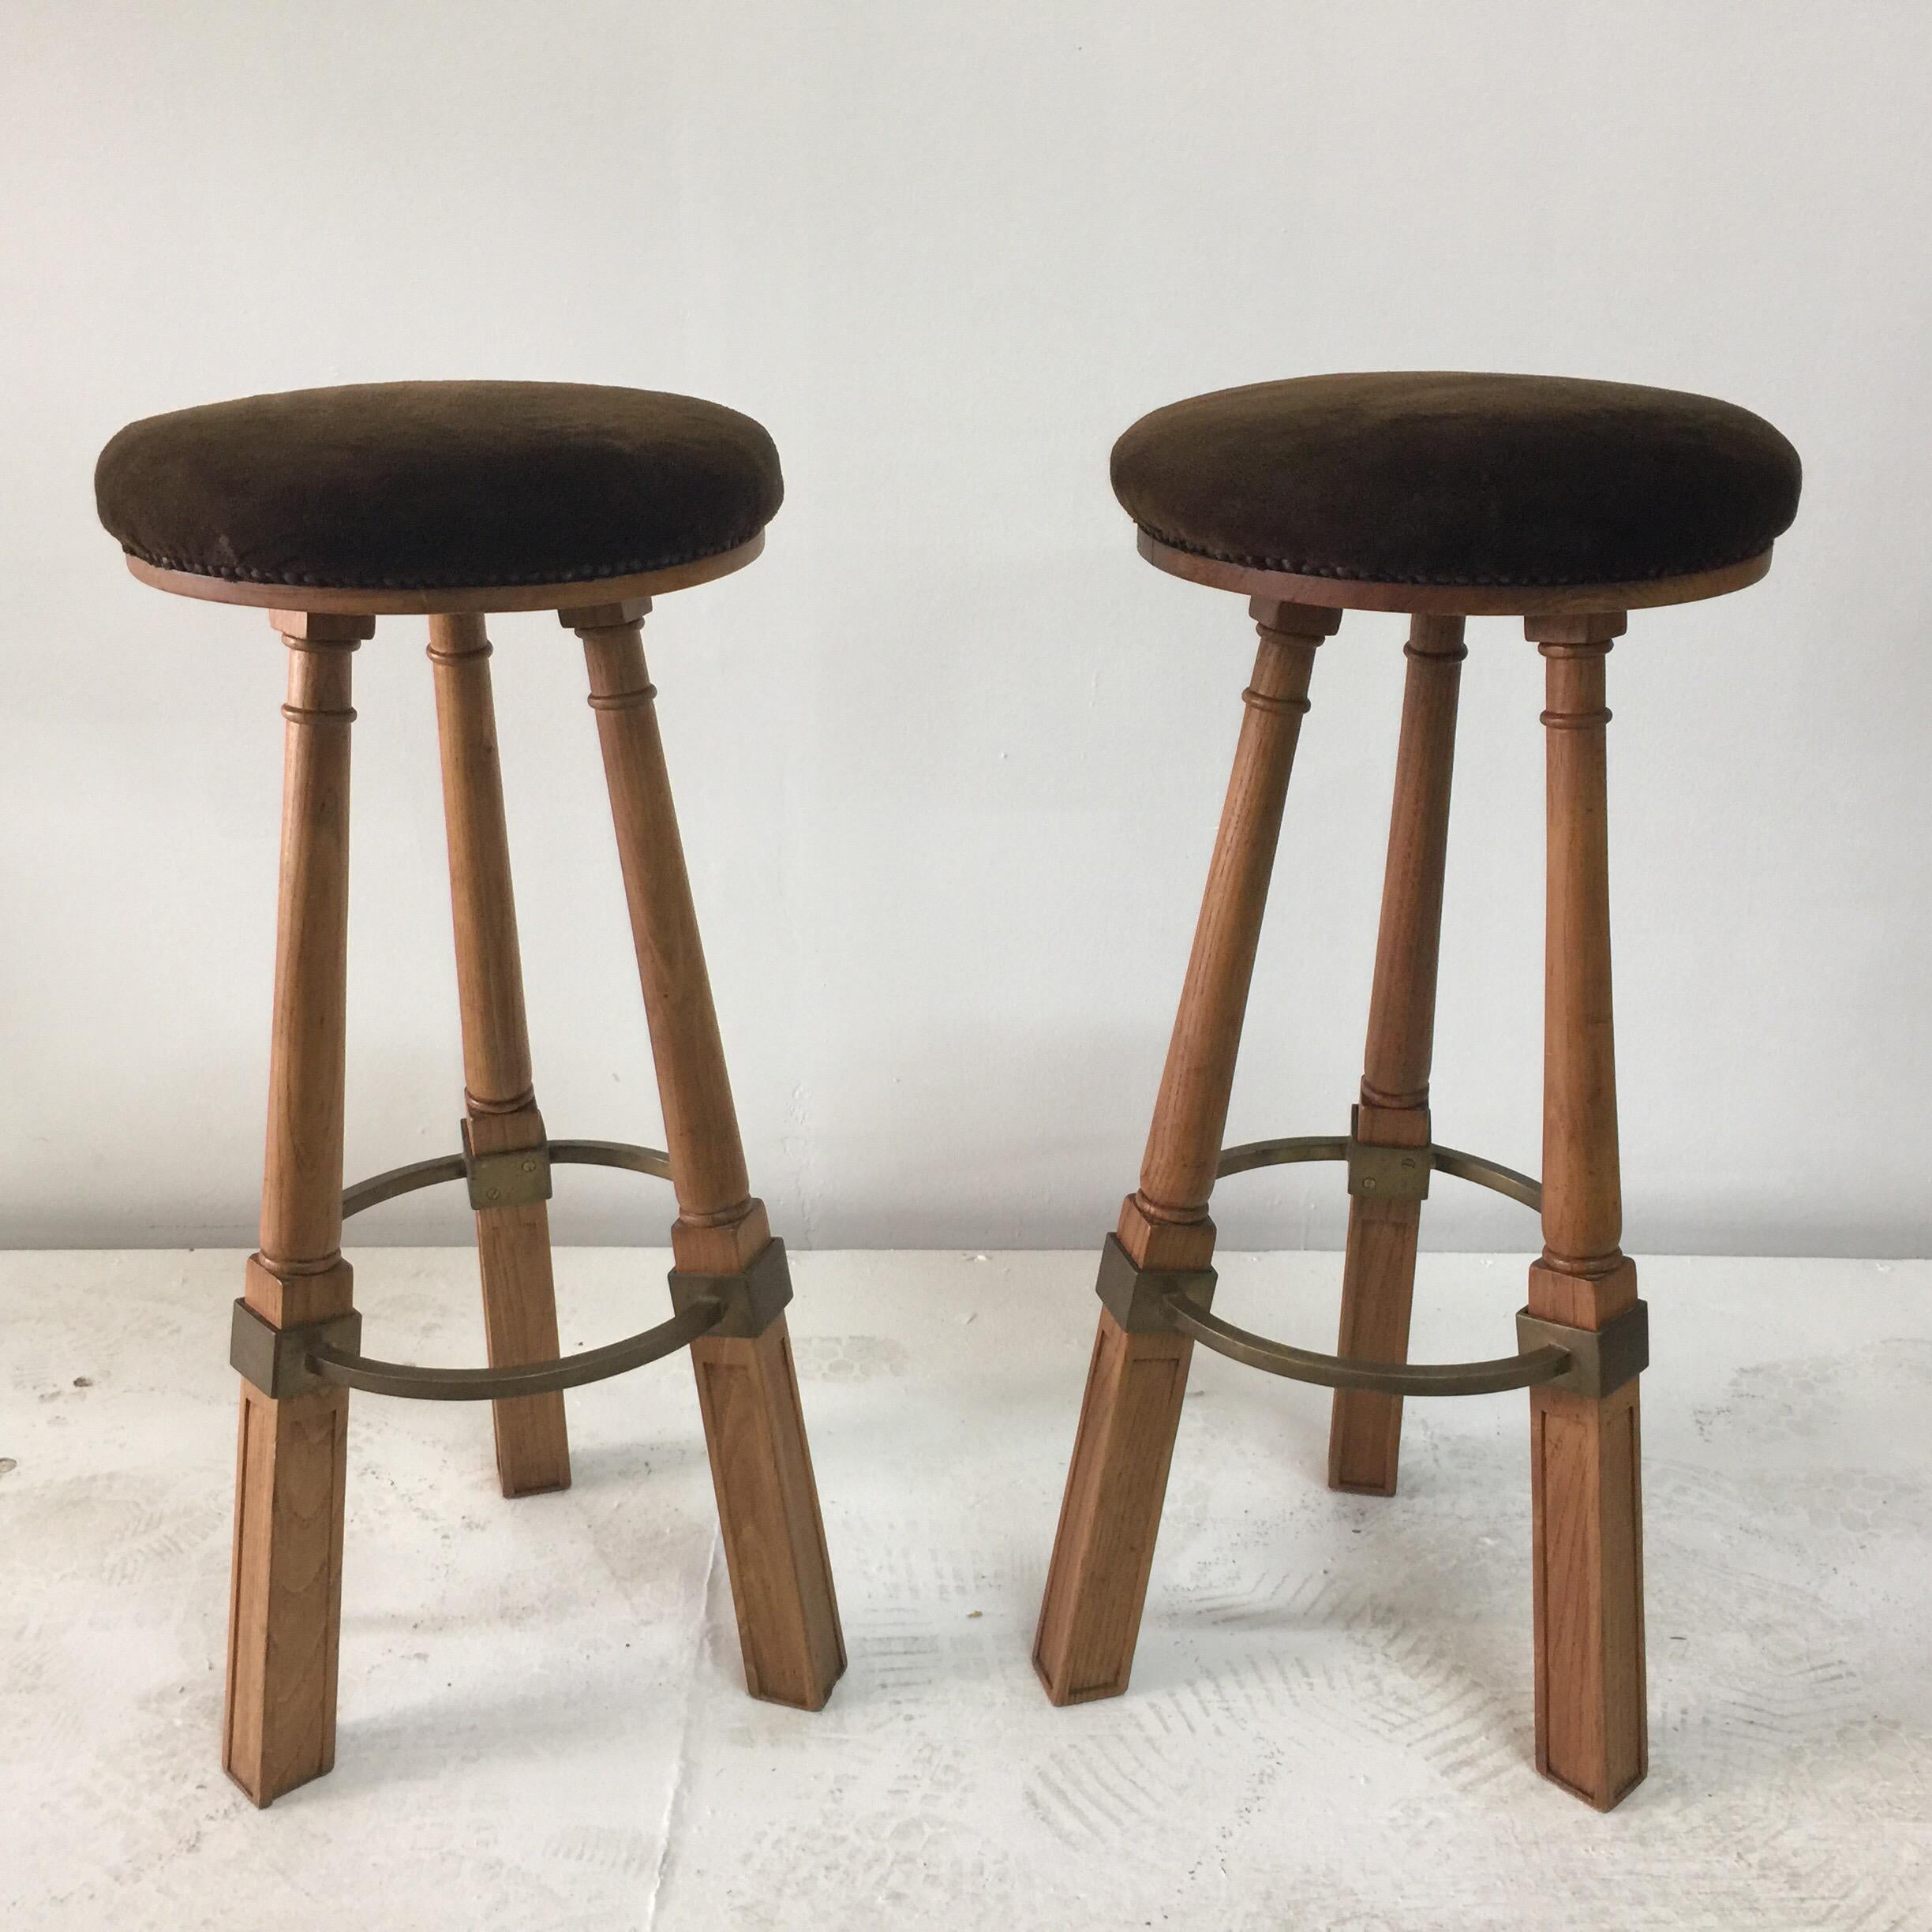 Fabric Pair of French Oak Bar Stools, Attributed to Jacques Adnet